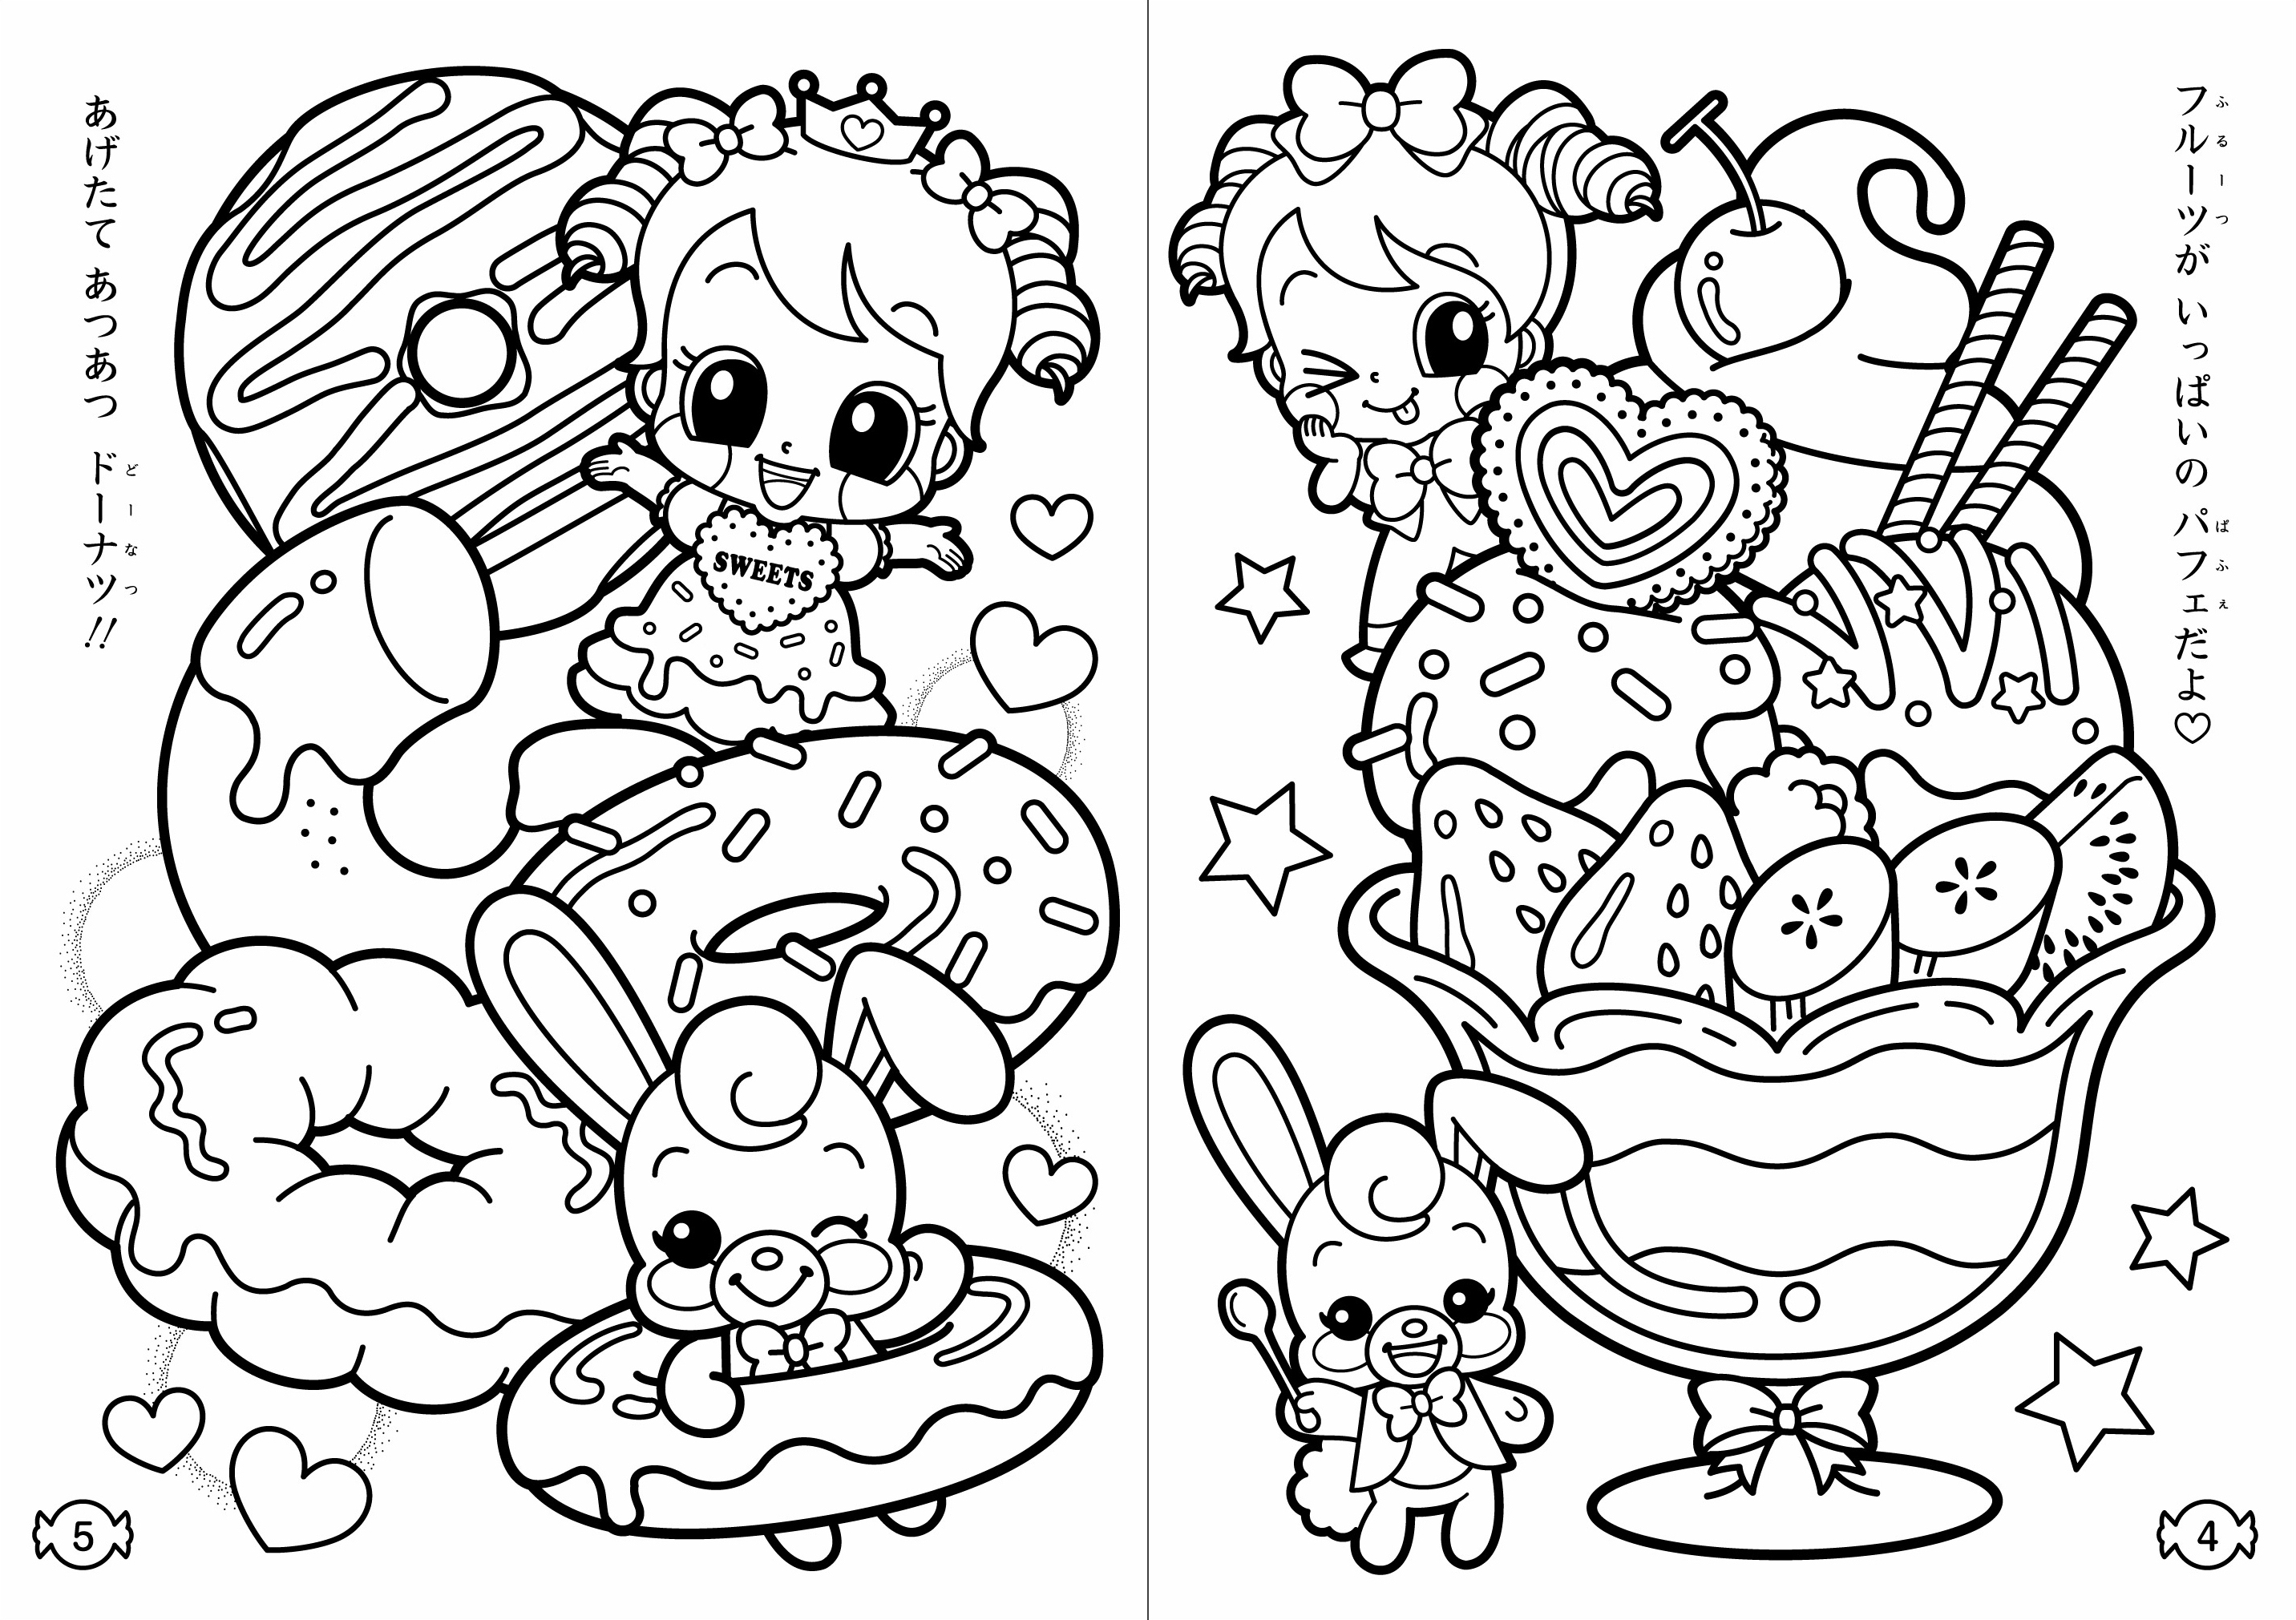 Cute Kawaii Coloring Pages at GetColorings.com | Free printable colorings pages to print and color